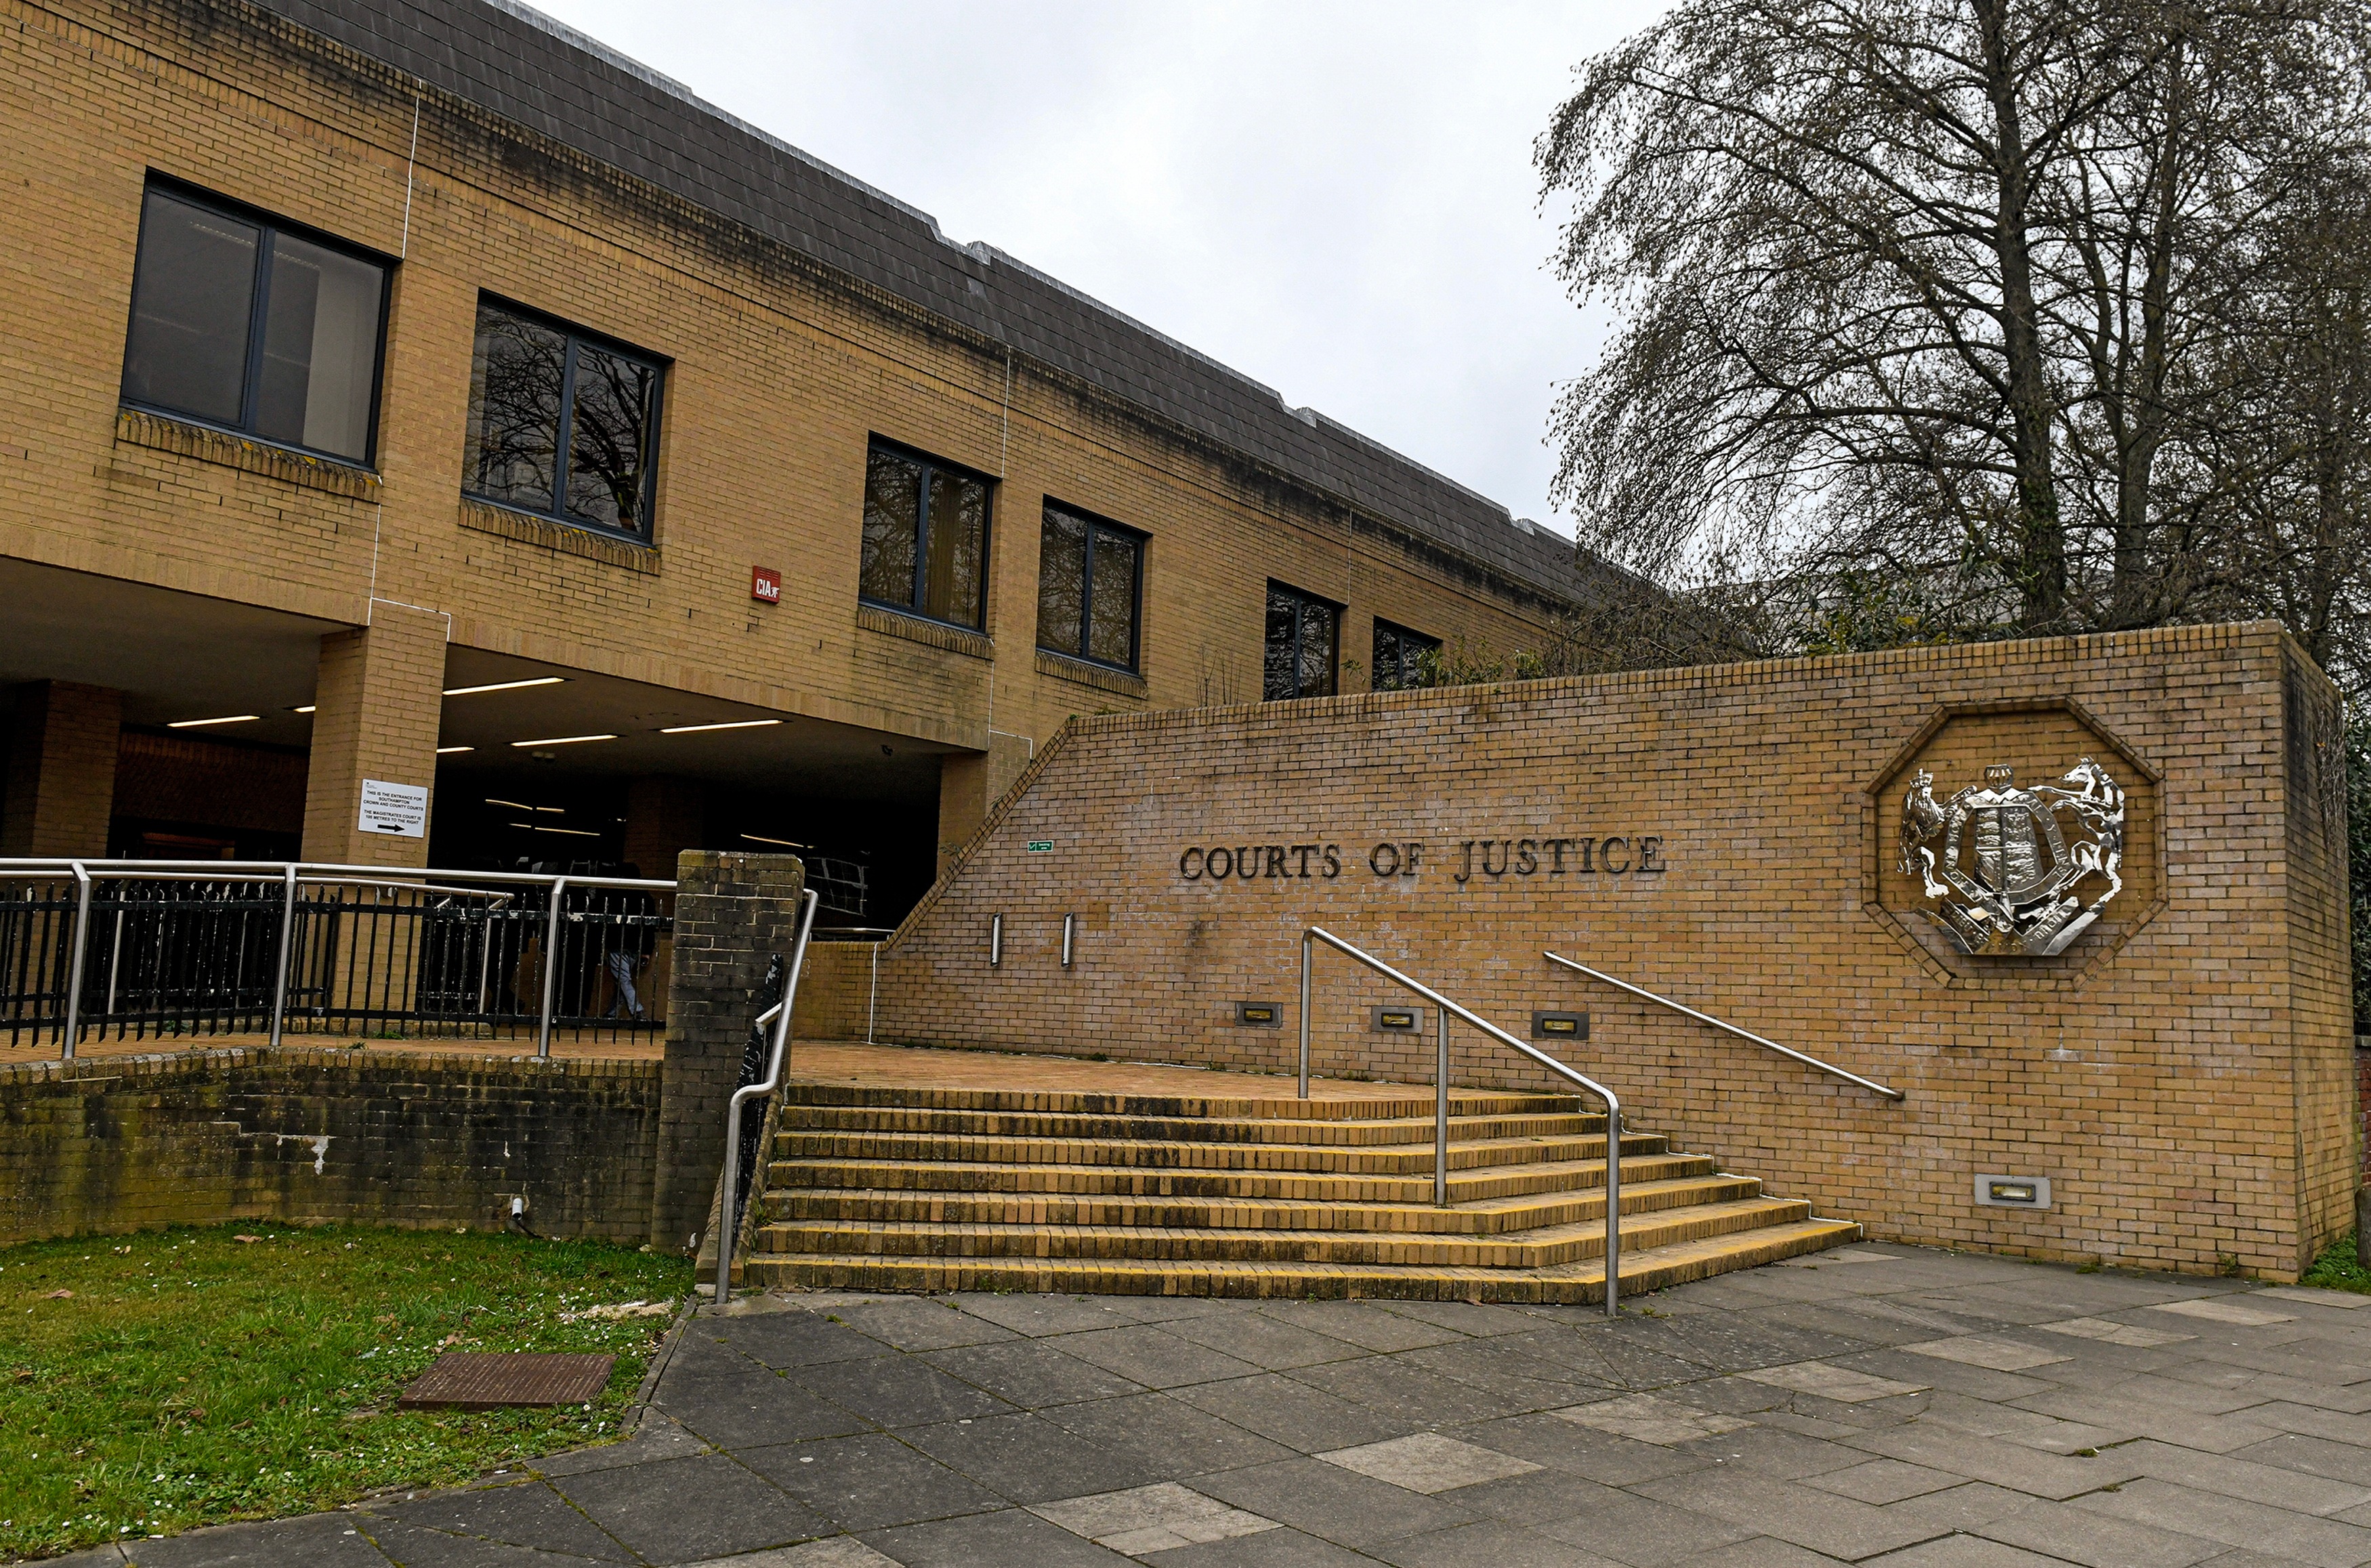 Herjean appeared at the Southampton Crown Court